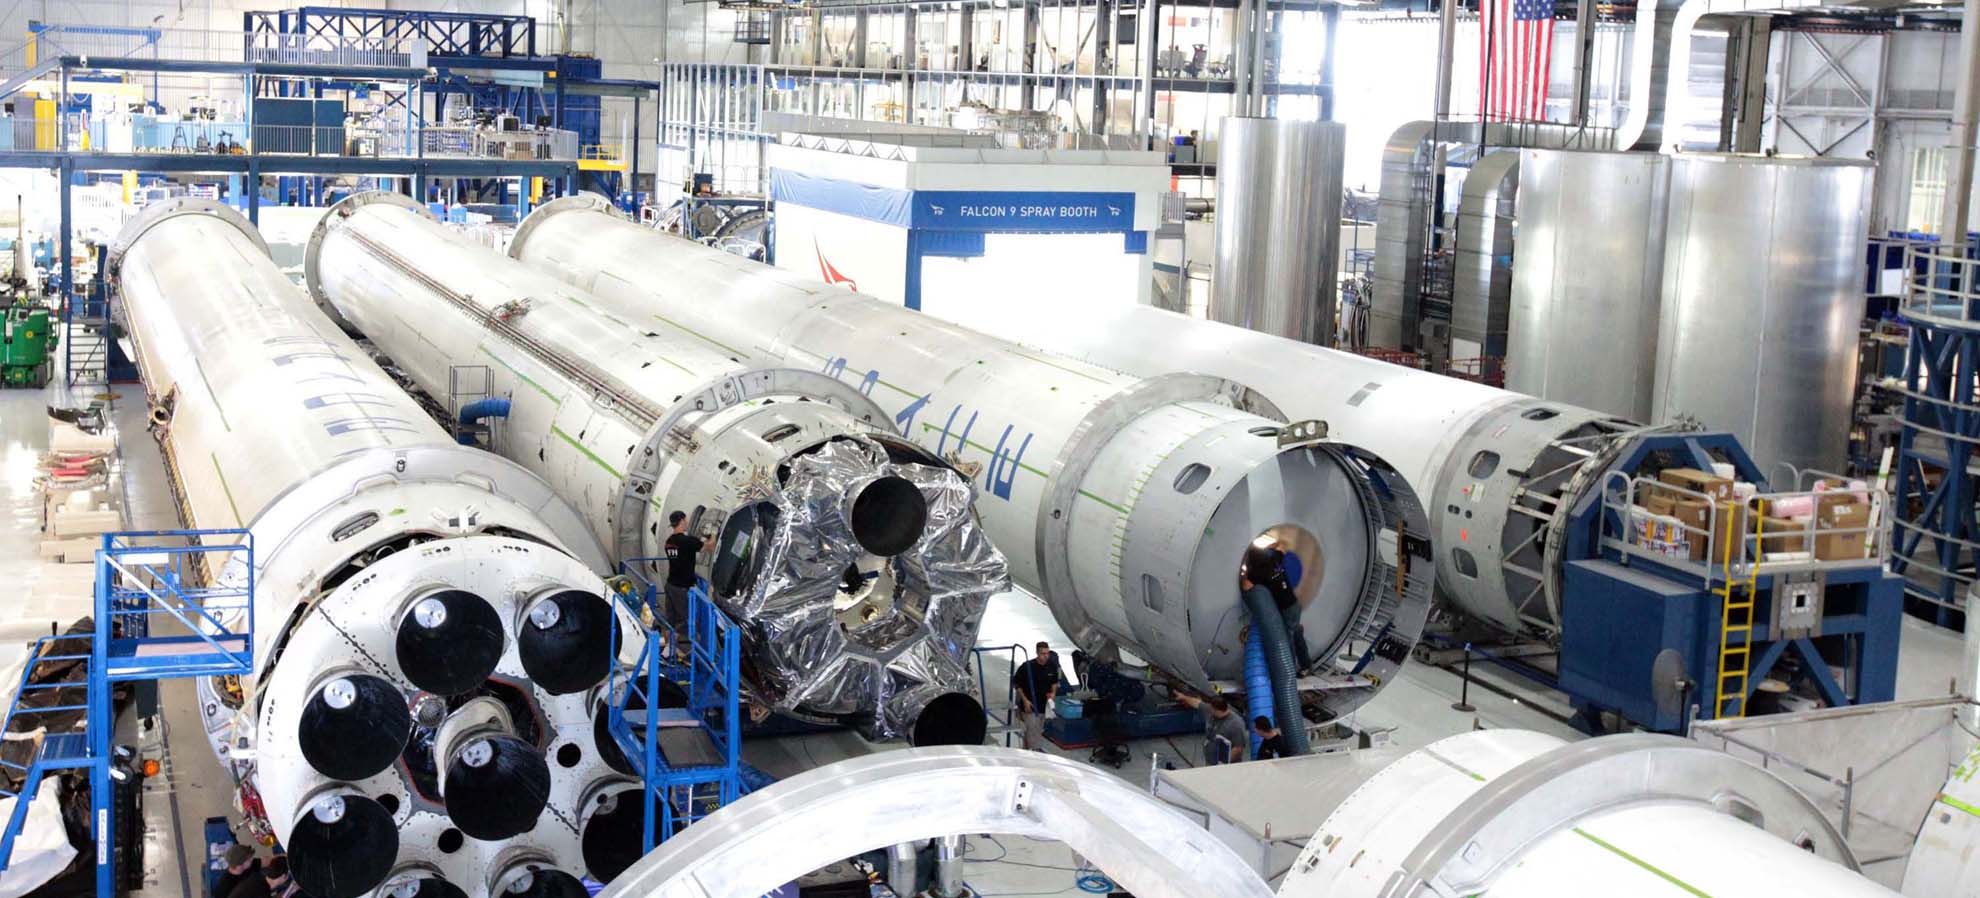 spacex rockets kept in the factory